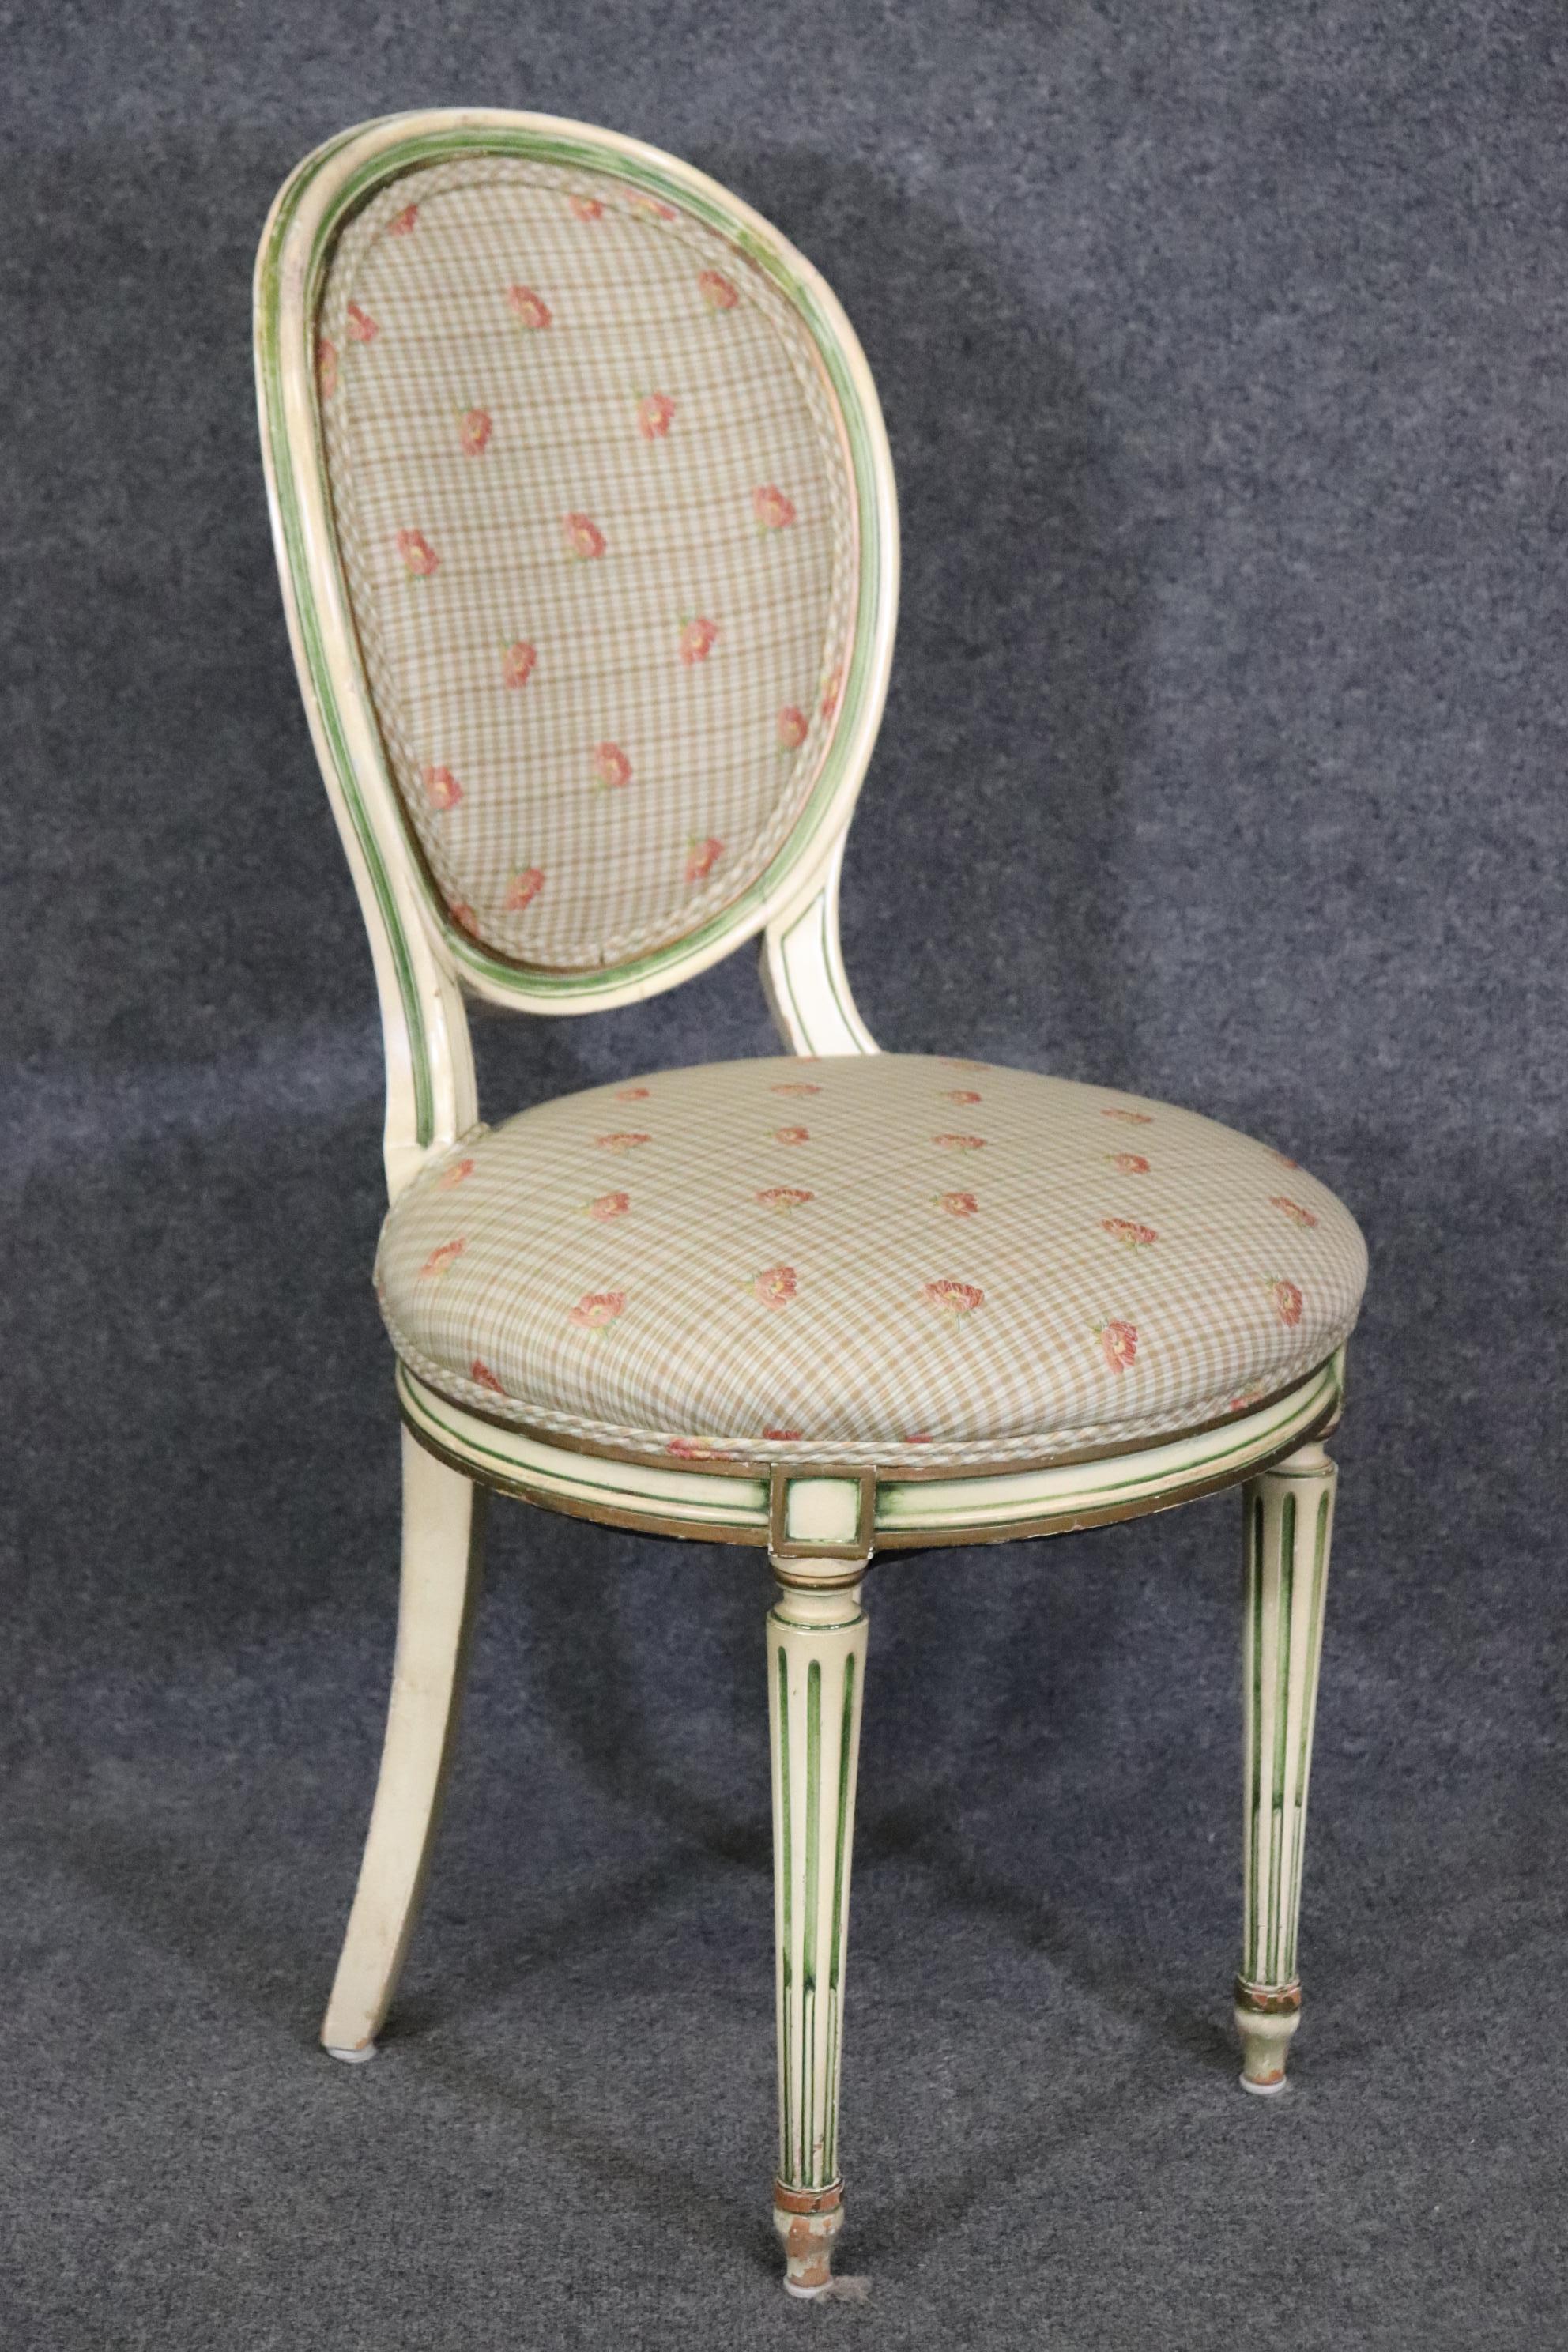 Dimensions- H: 38 3/4in W: 19 3/4in D: 21 1/2in SH: 19 3/4in 
This set of 4 Louis XVI Style Dining Chairs is made with immense detail and of the highest quality and is up to par with brands such as Baker and Bodart! If you look at the photos